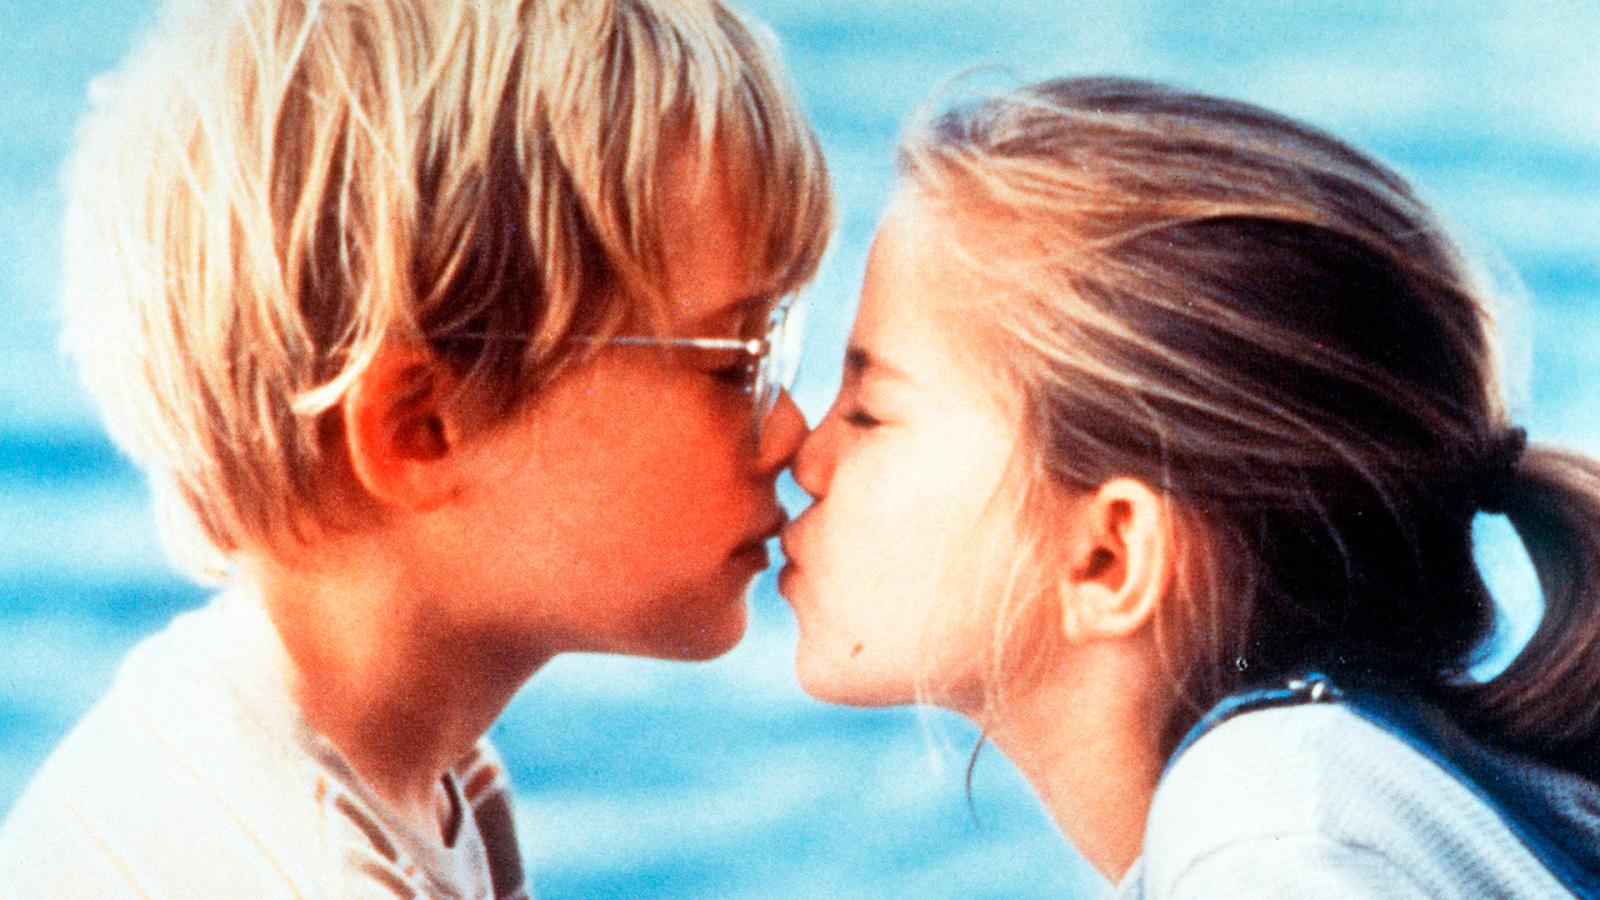 7 Tearjerkers Movies That Will Have You Crying Like a Baby - image 1